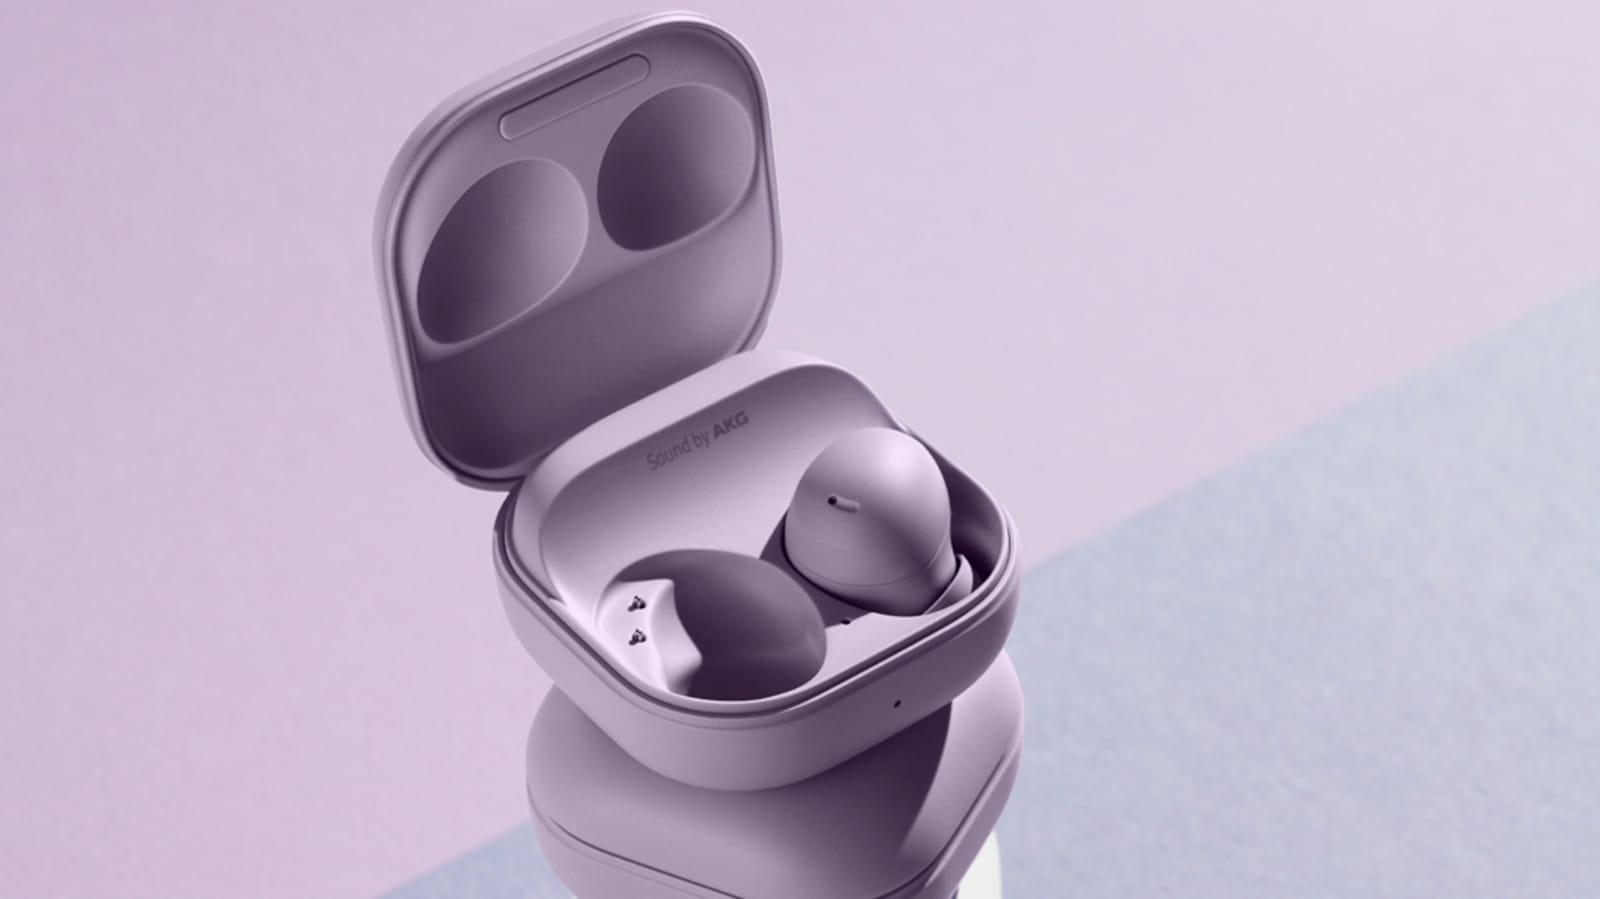 Samsung Galaxy Buds 2 Pro: Price, Release Date, Specs, Preorder